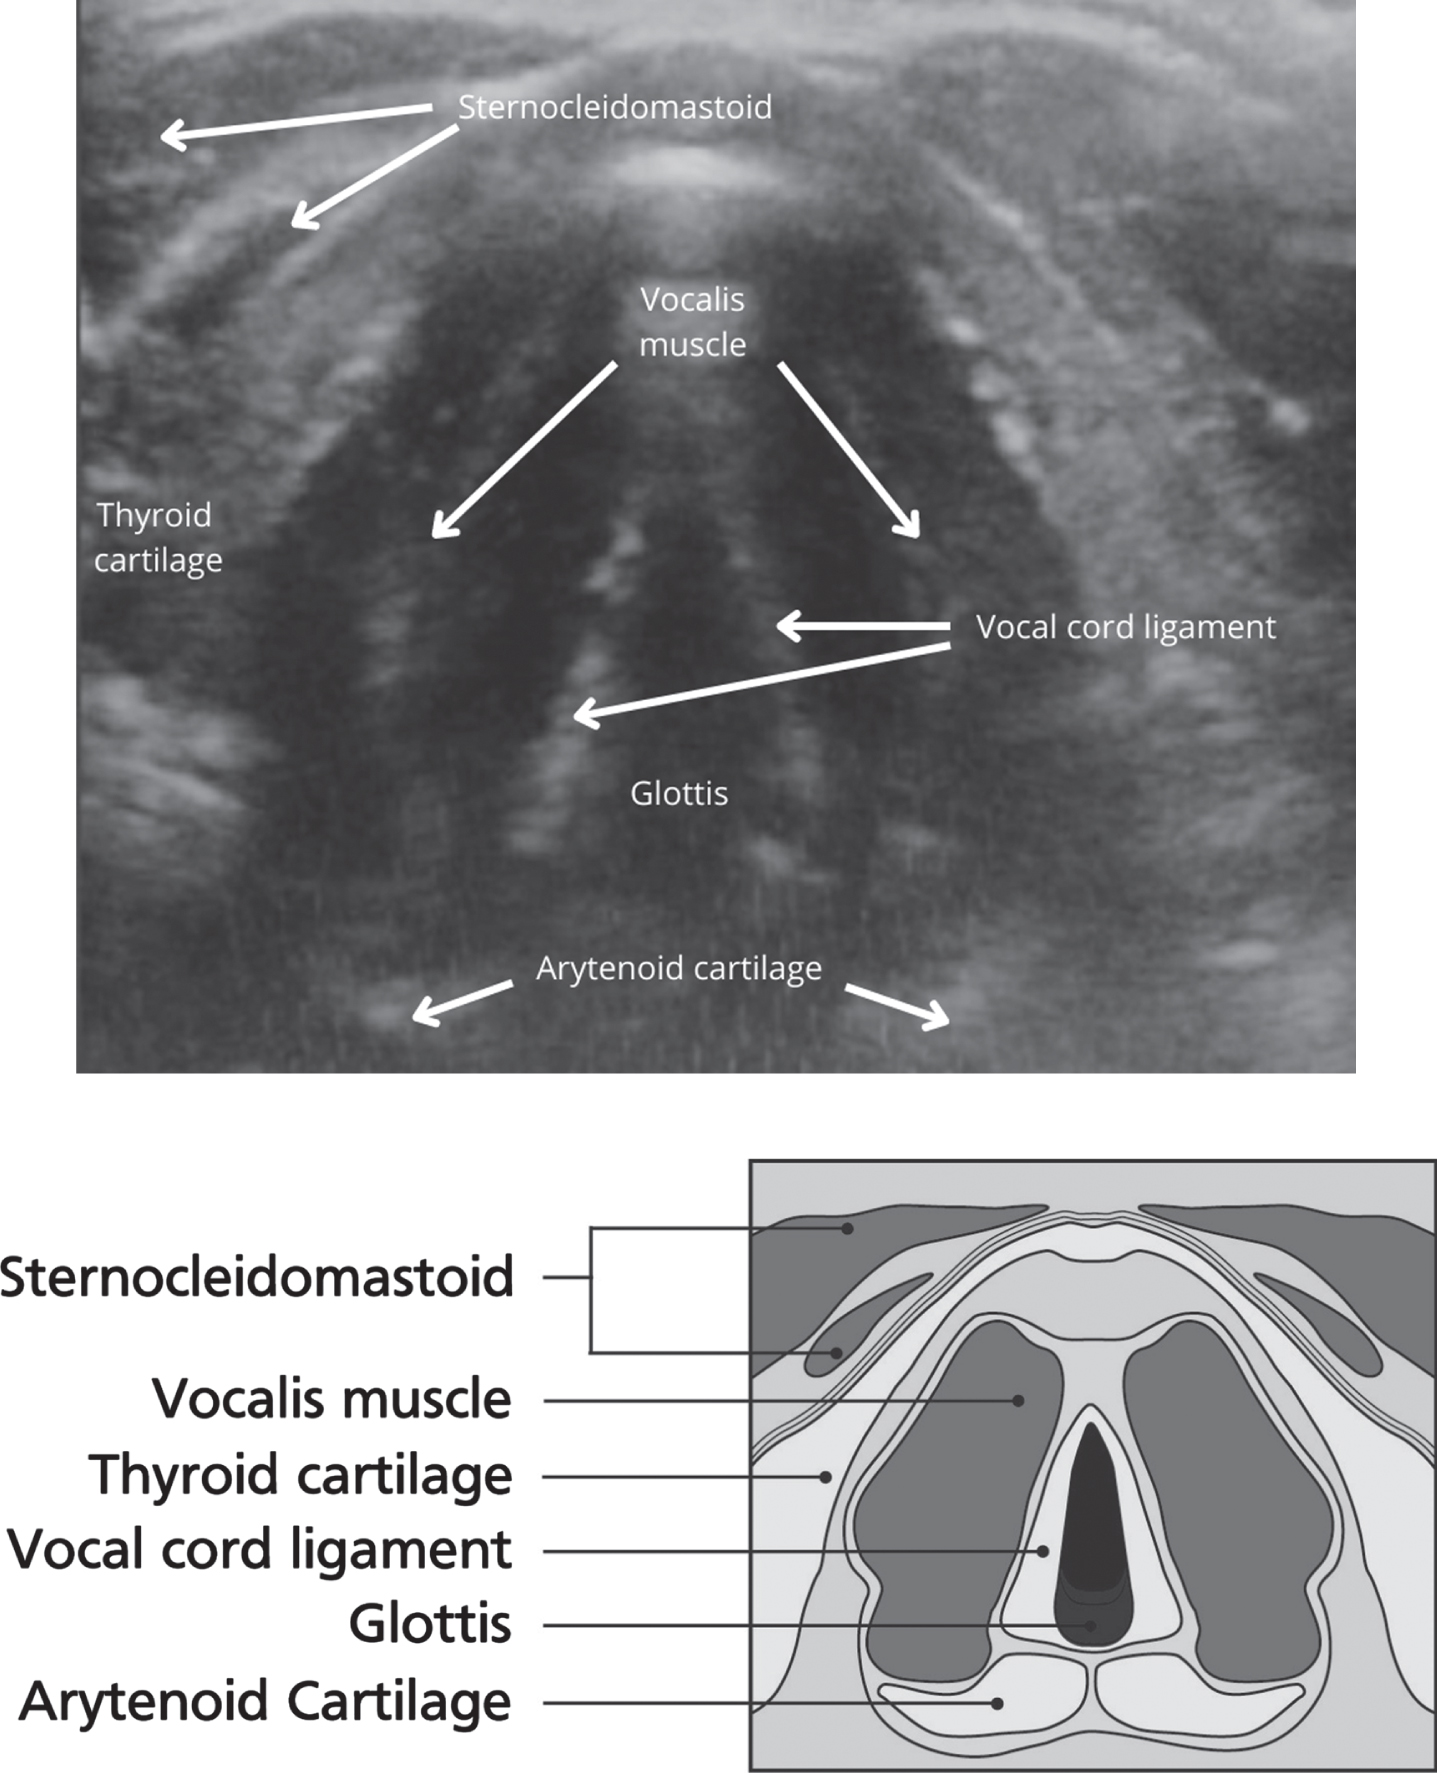 Images of Vocal folds using ultrasound and schematic diagram.